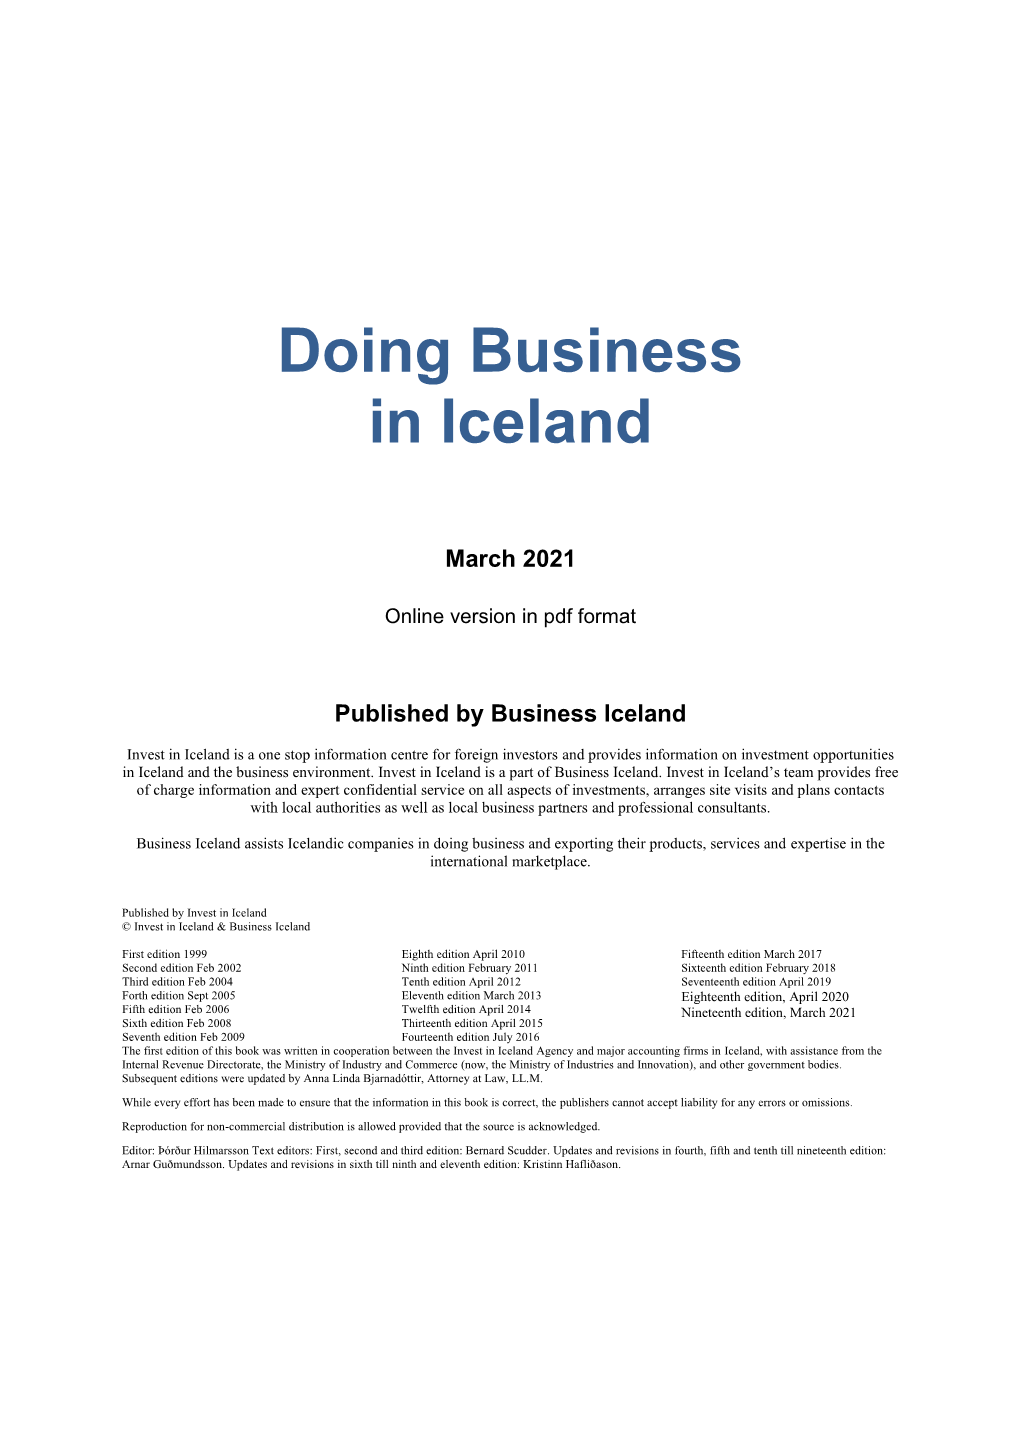 Doing Business in Iceland